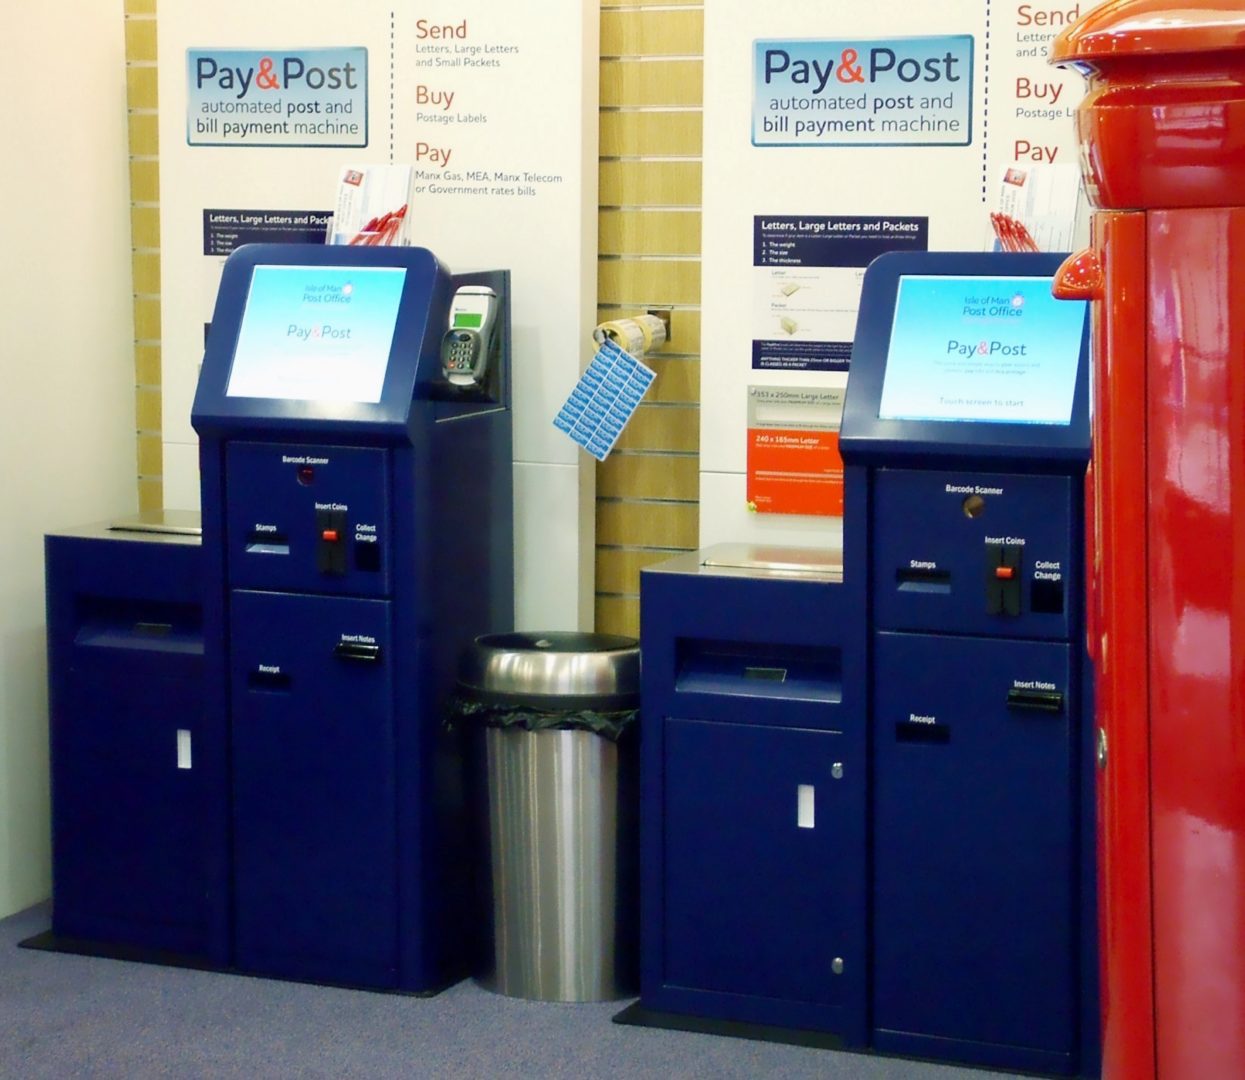 digital post kiosks with integrated drop box allowing stamp printing and change giving designed for pick up and drop off (PUDO)